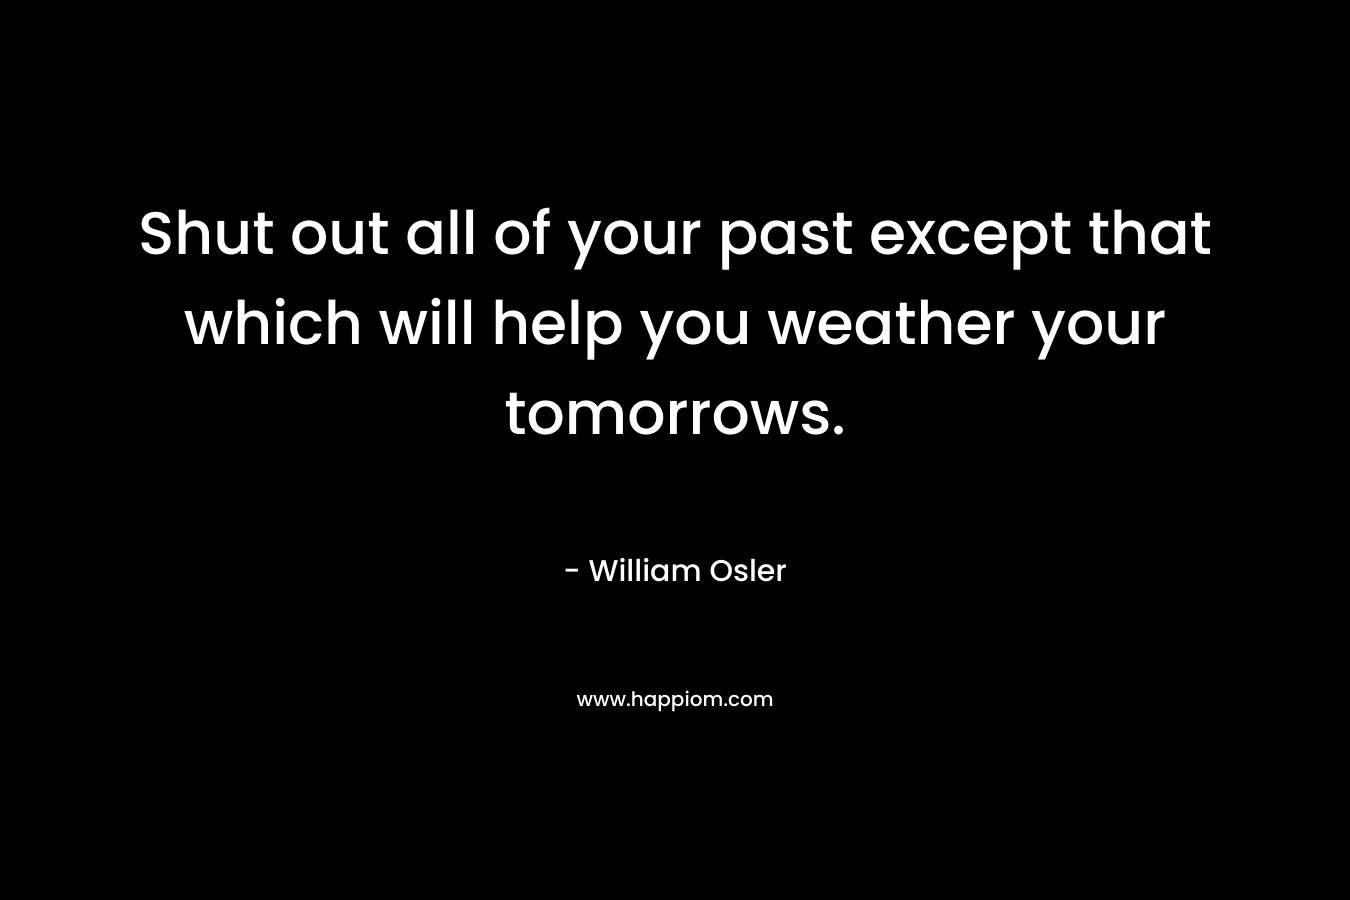 Shut out all of your past except that which will help you weather your tomorrows.